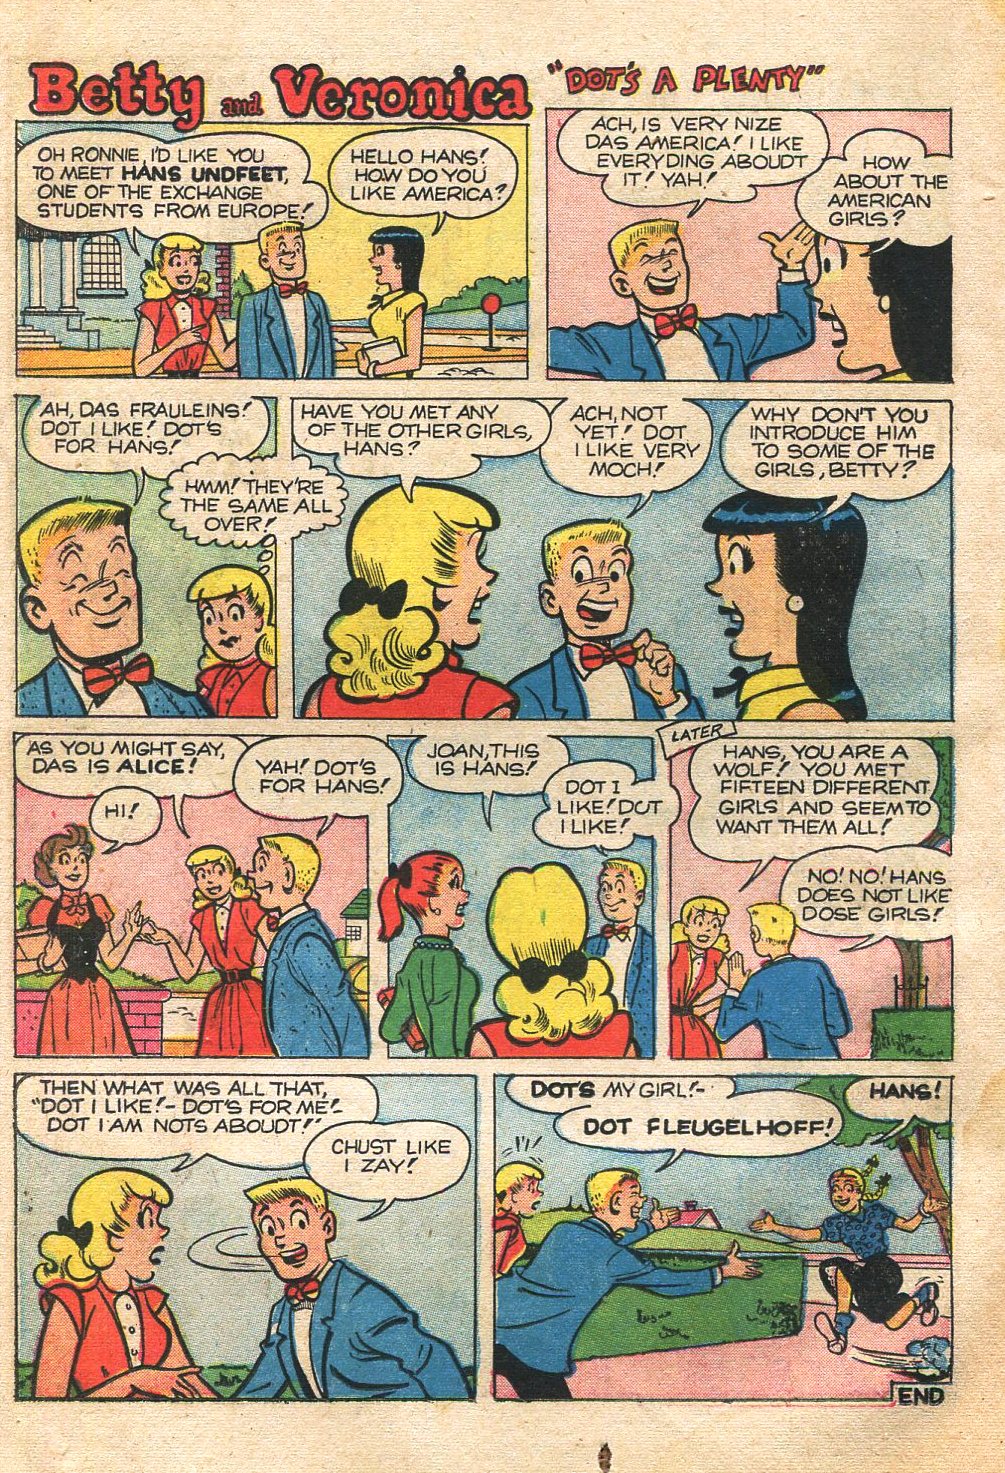 Read online Archie's Girls Betty and Veronica comic -  Issue #4 - 74